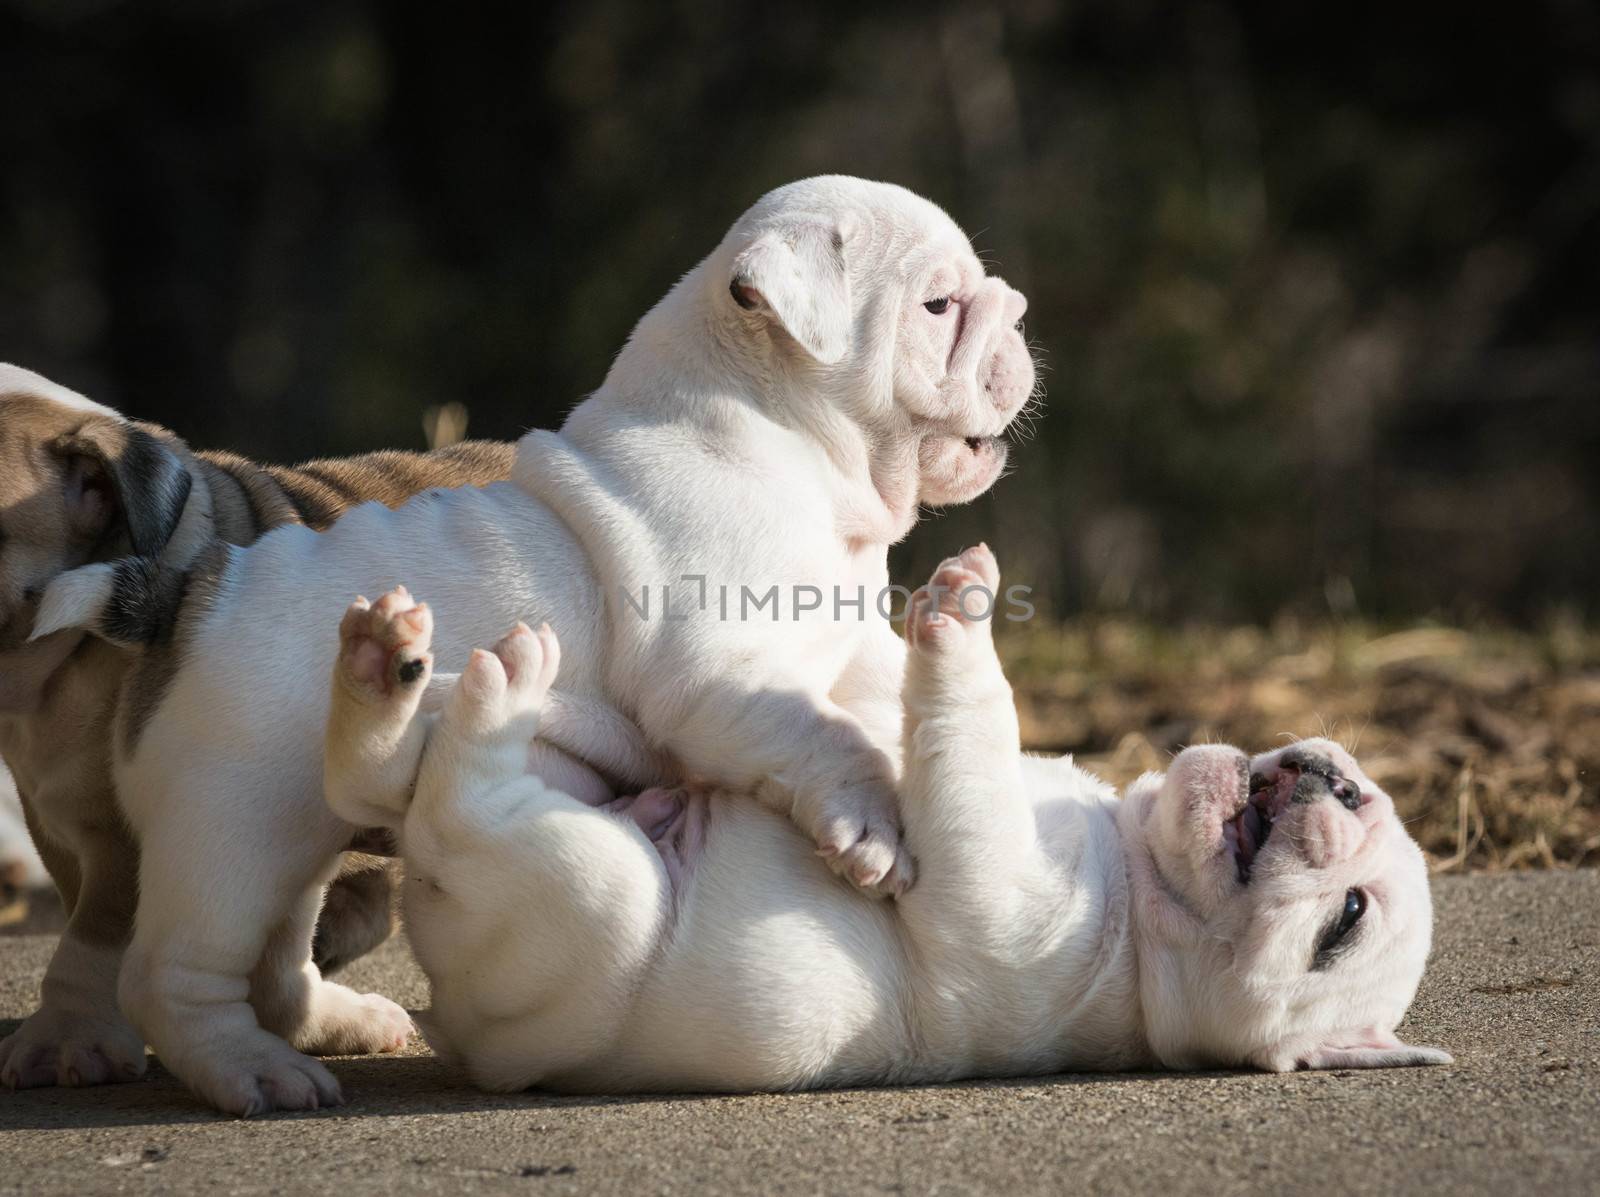 english bulldog puppies play fighting outside in the yard